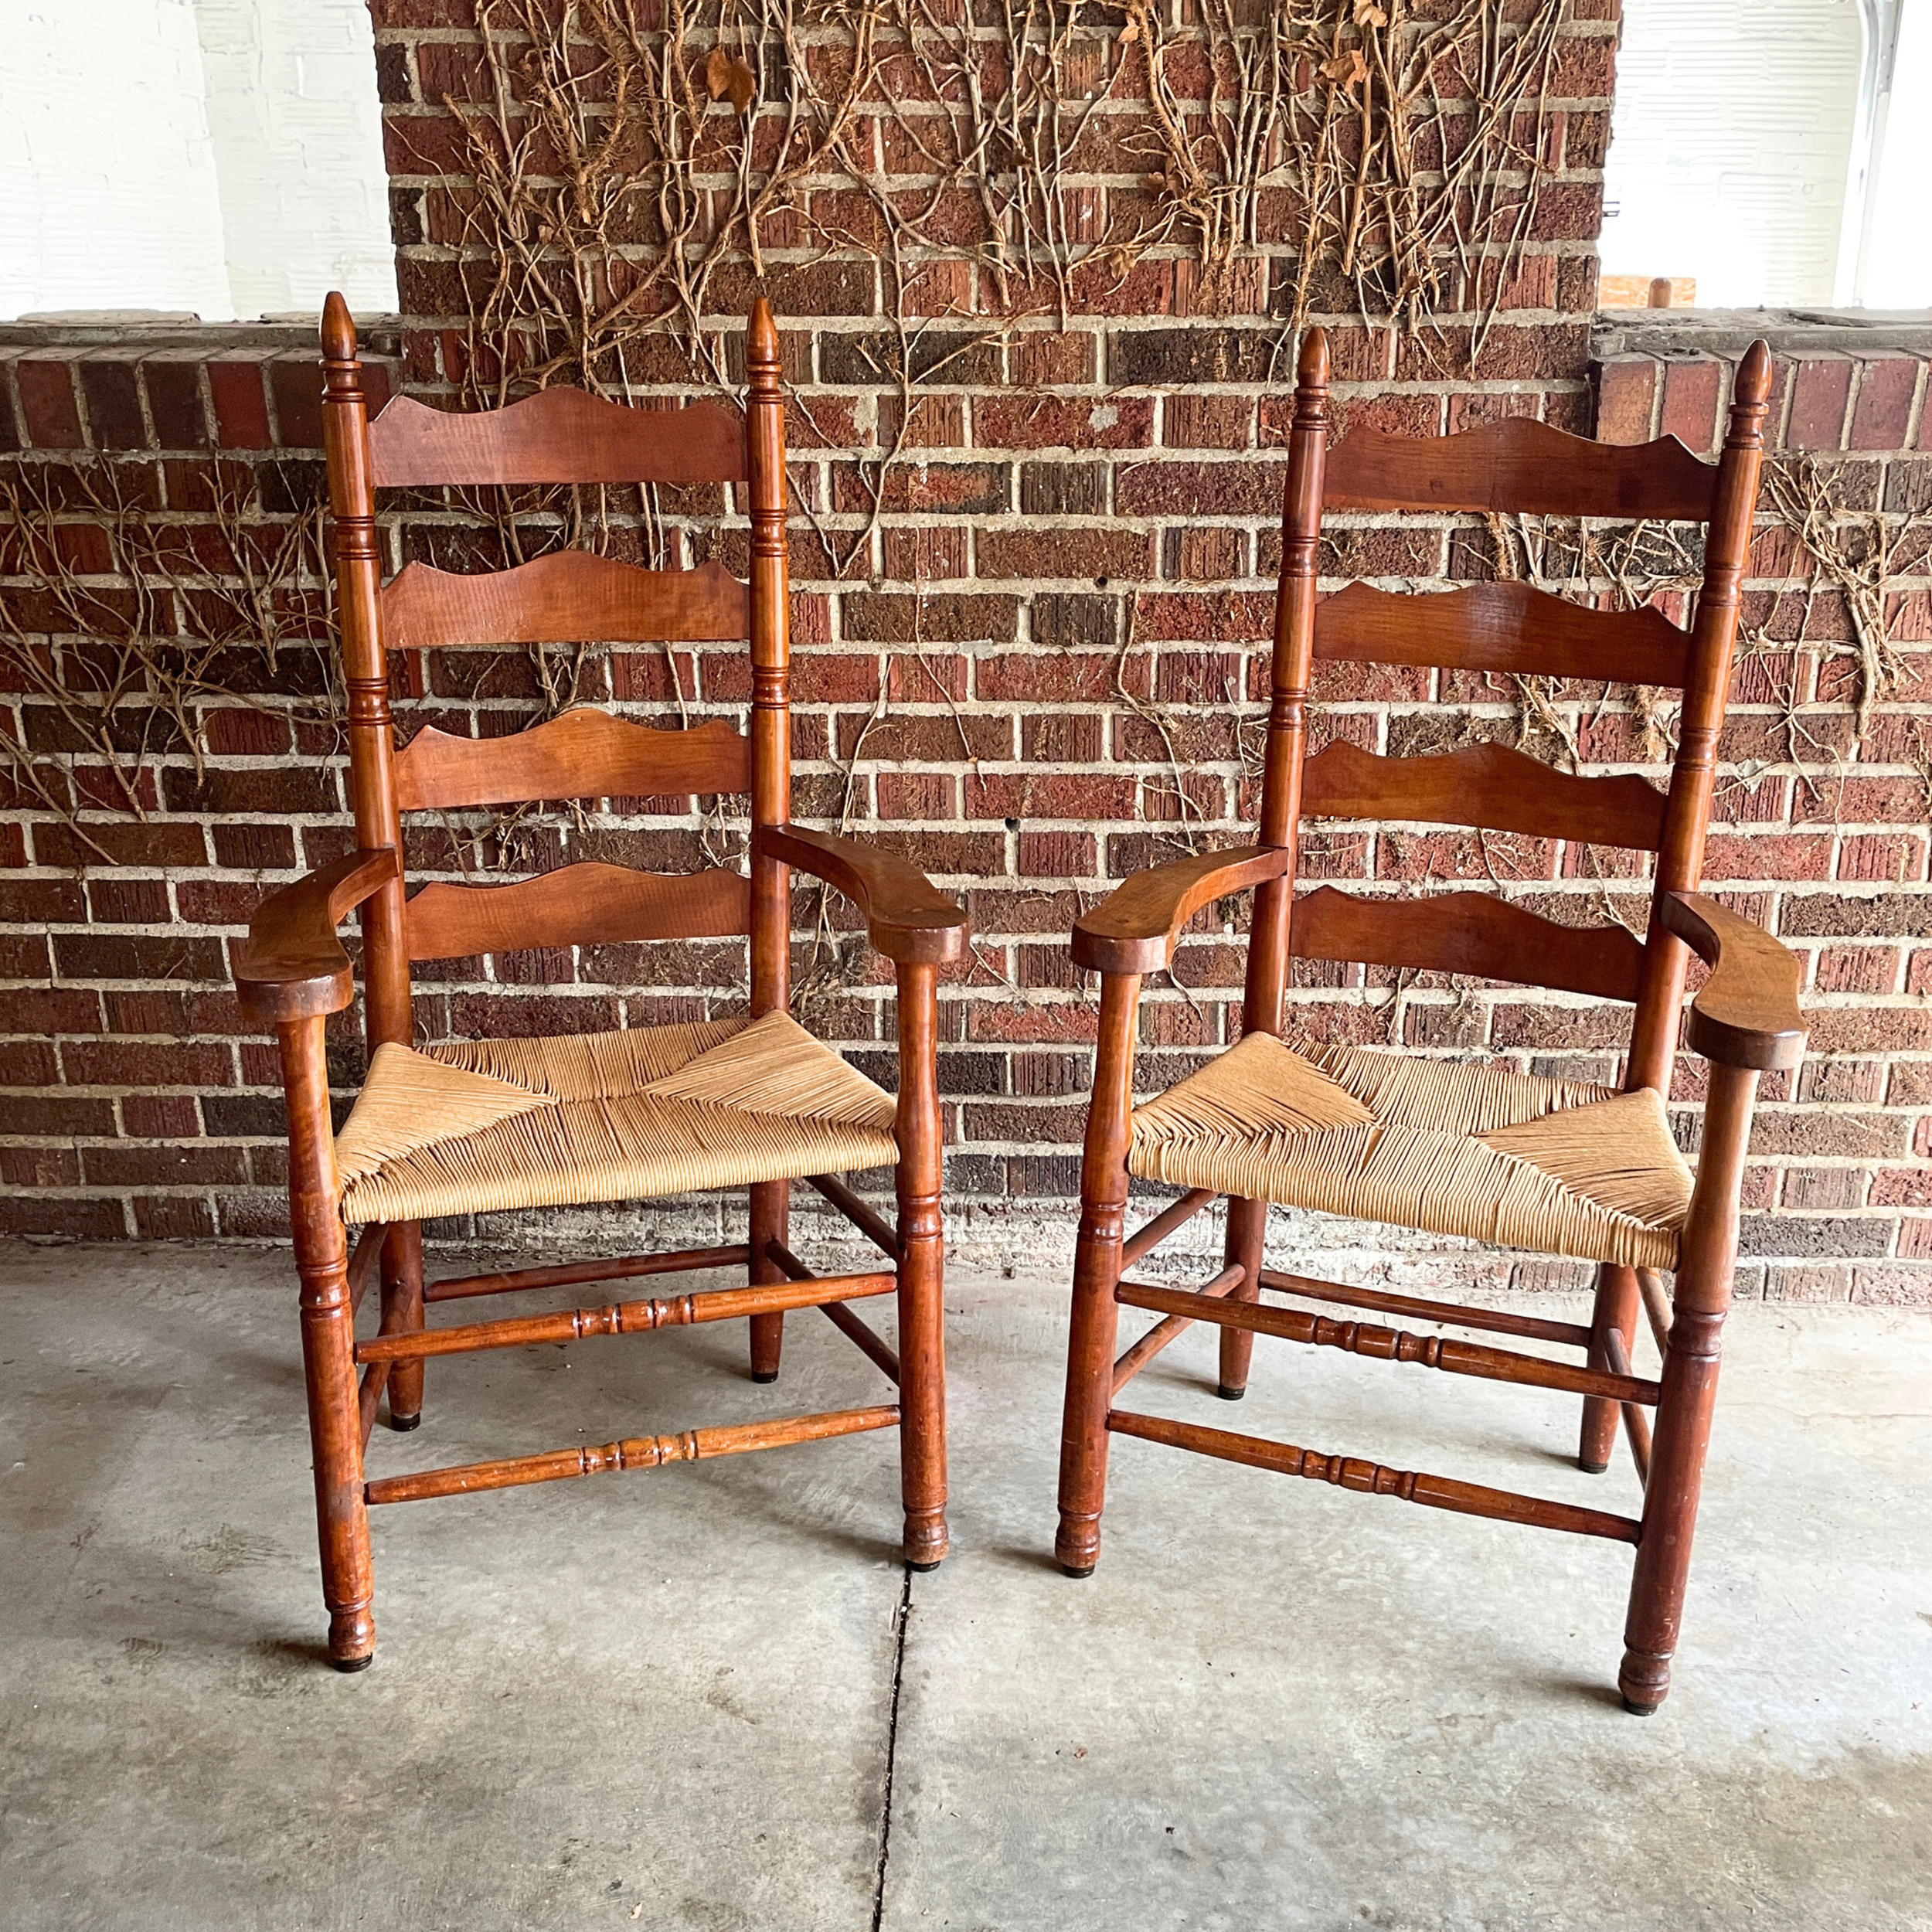 Pair of Ladder Back Chairs with Woven Rush Seats